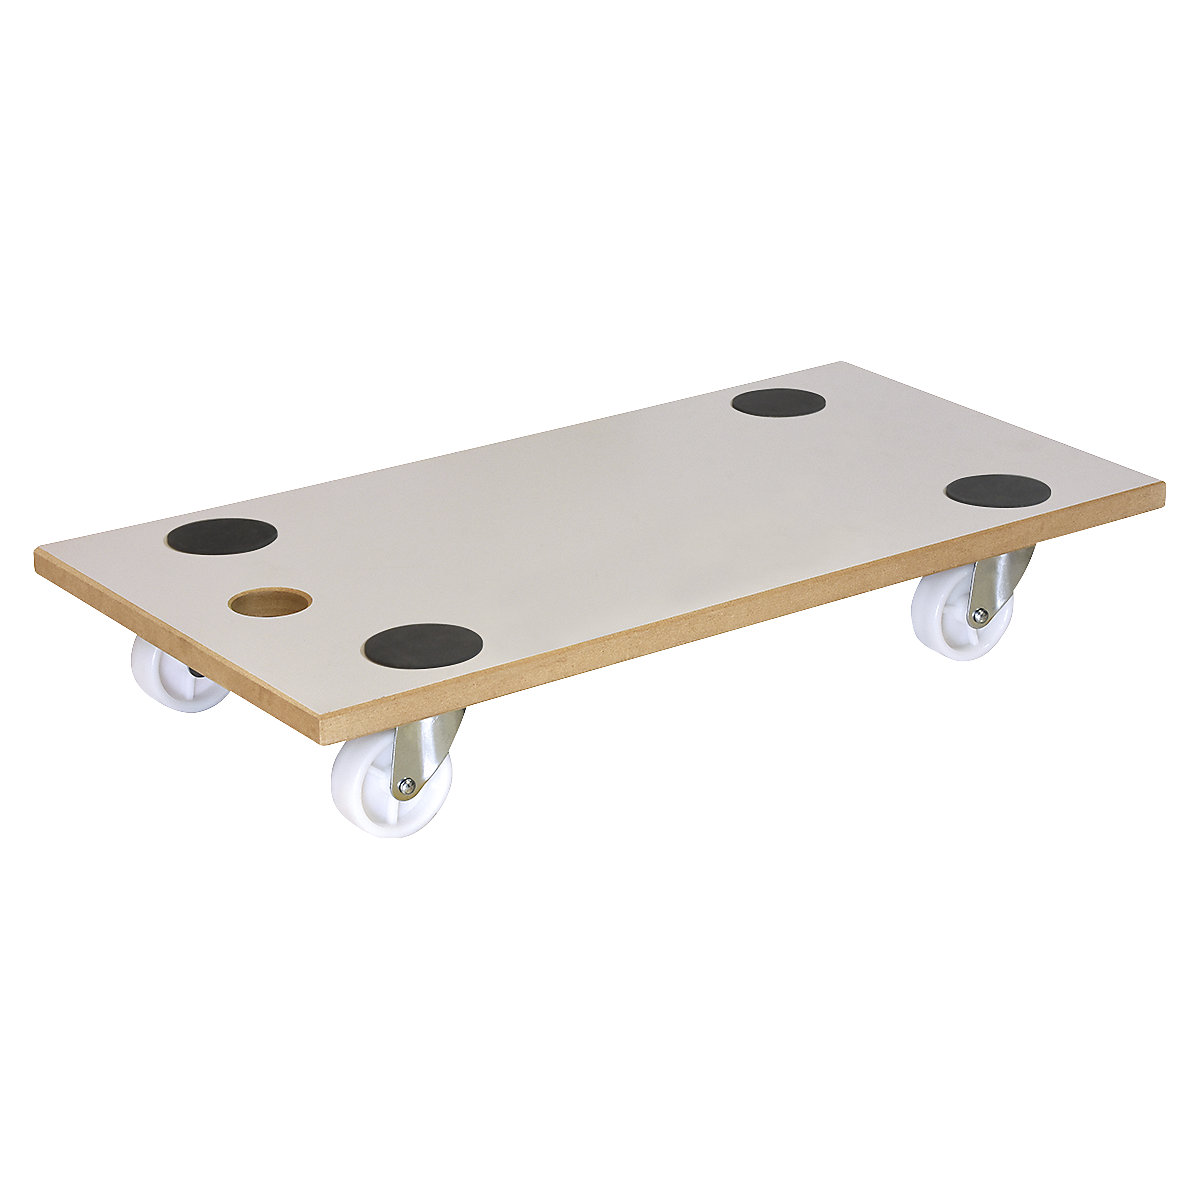 Transport dolly with grip hole – Wagner, MM 1319, castors for soft floors, pack of 2, LxW 575 x 300 mm, 2+ packs-4